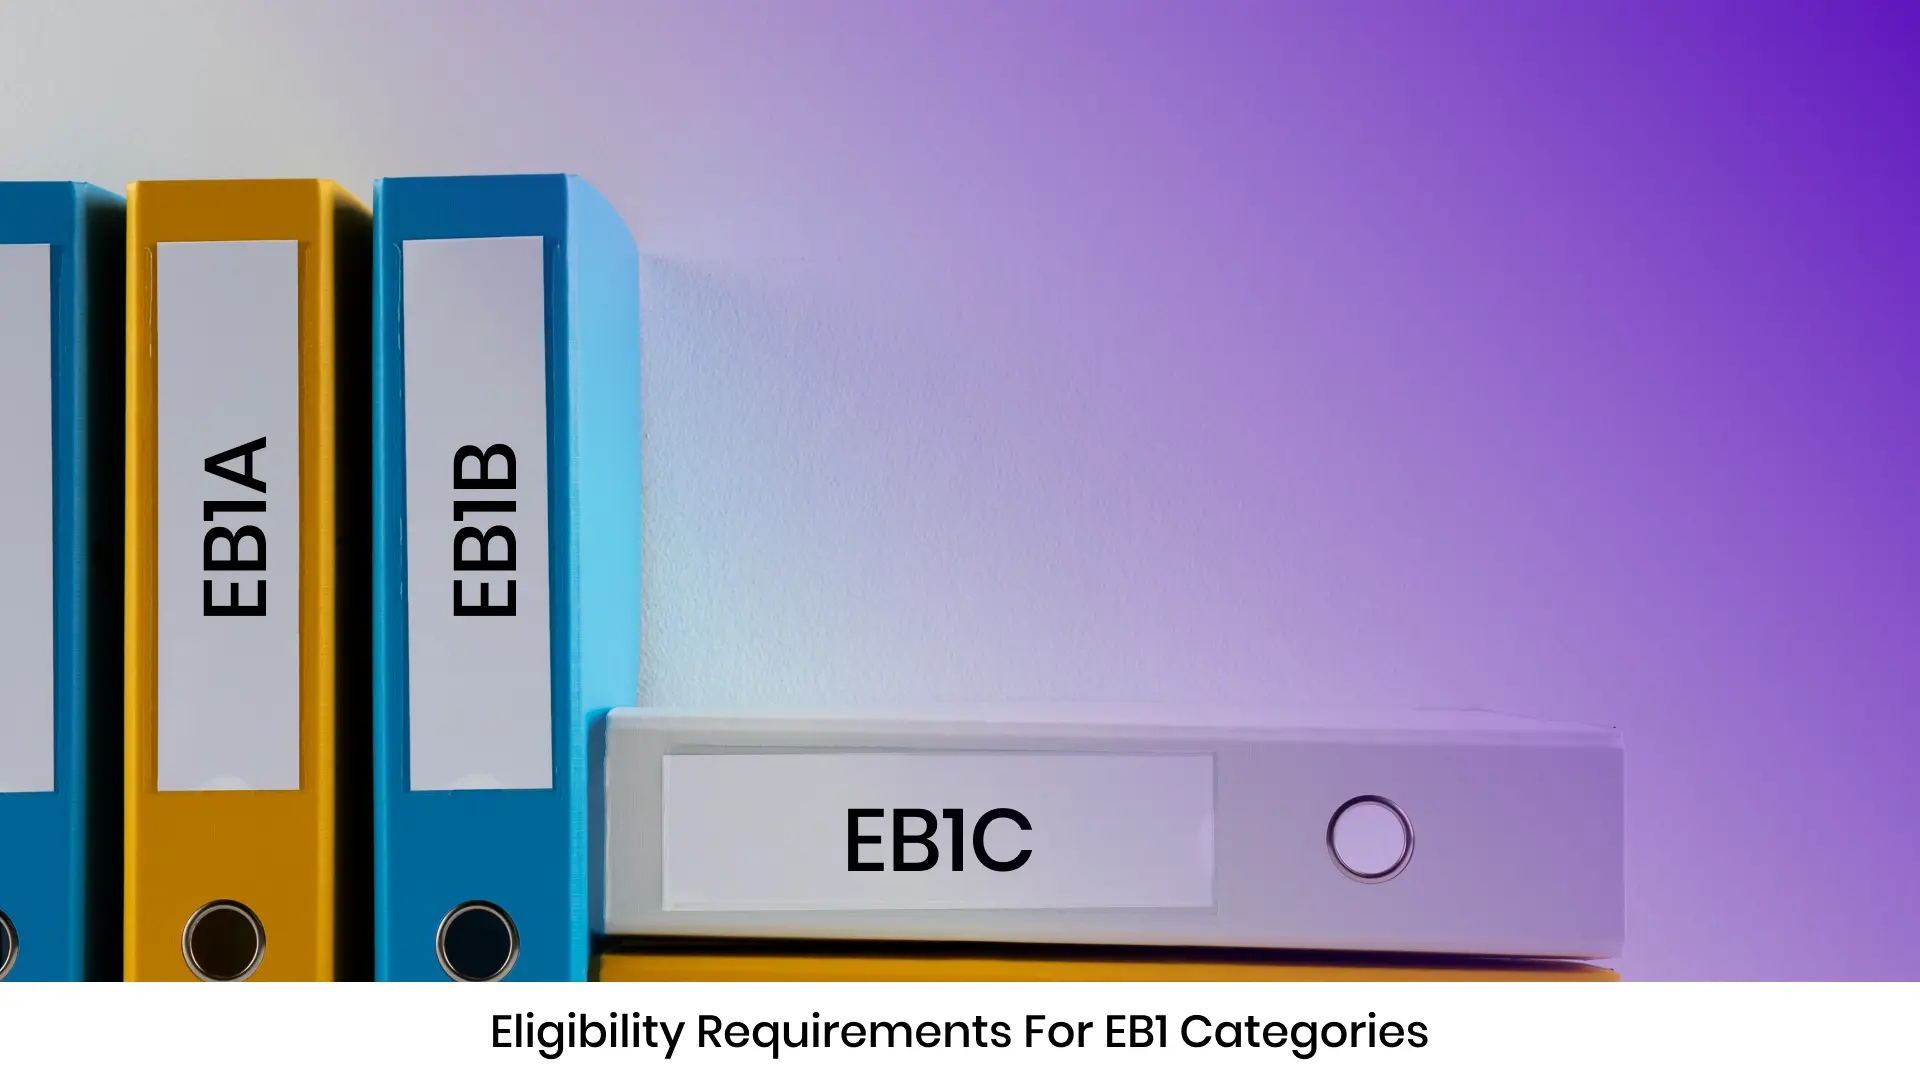 Eligibility Requirements for EB1 Green Card Categories